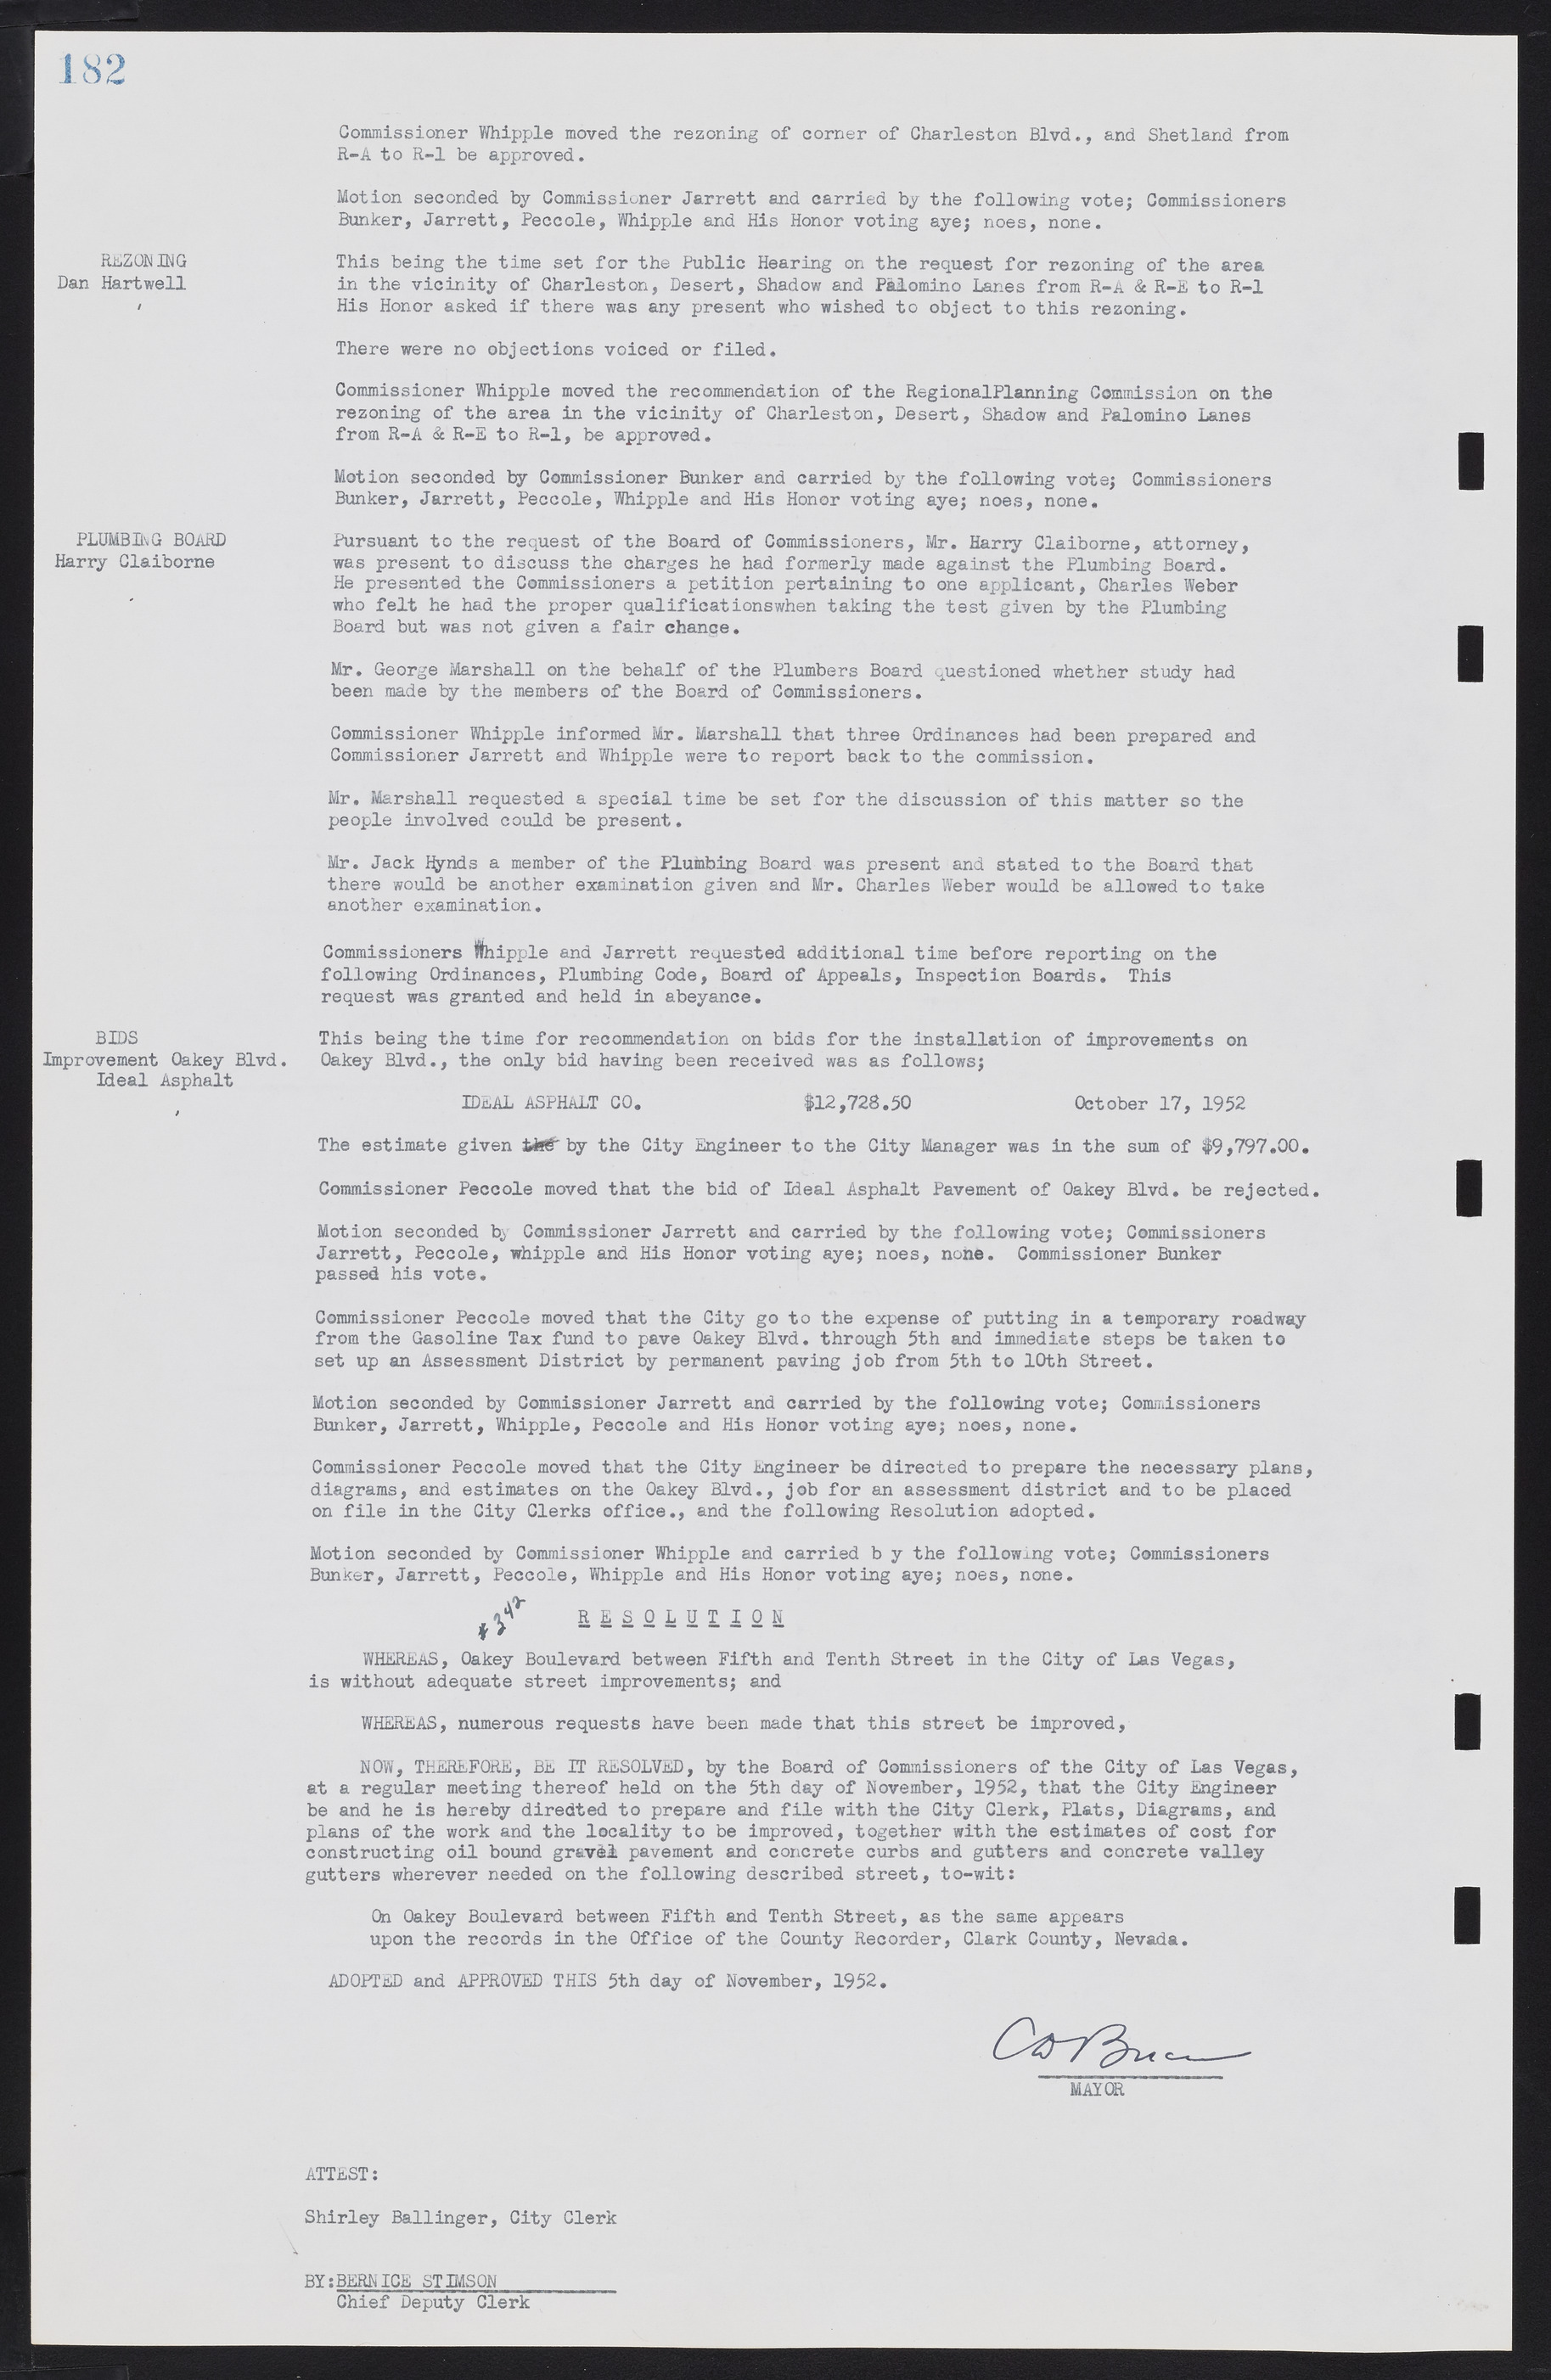 Las Vegas City Commission Minutes, May 26, 1952 to February 17, 1954, lvc000008-196